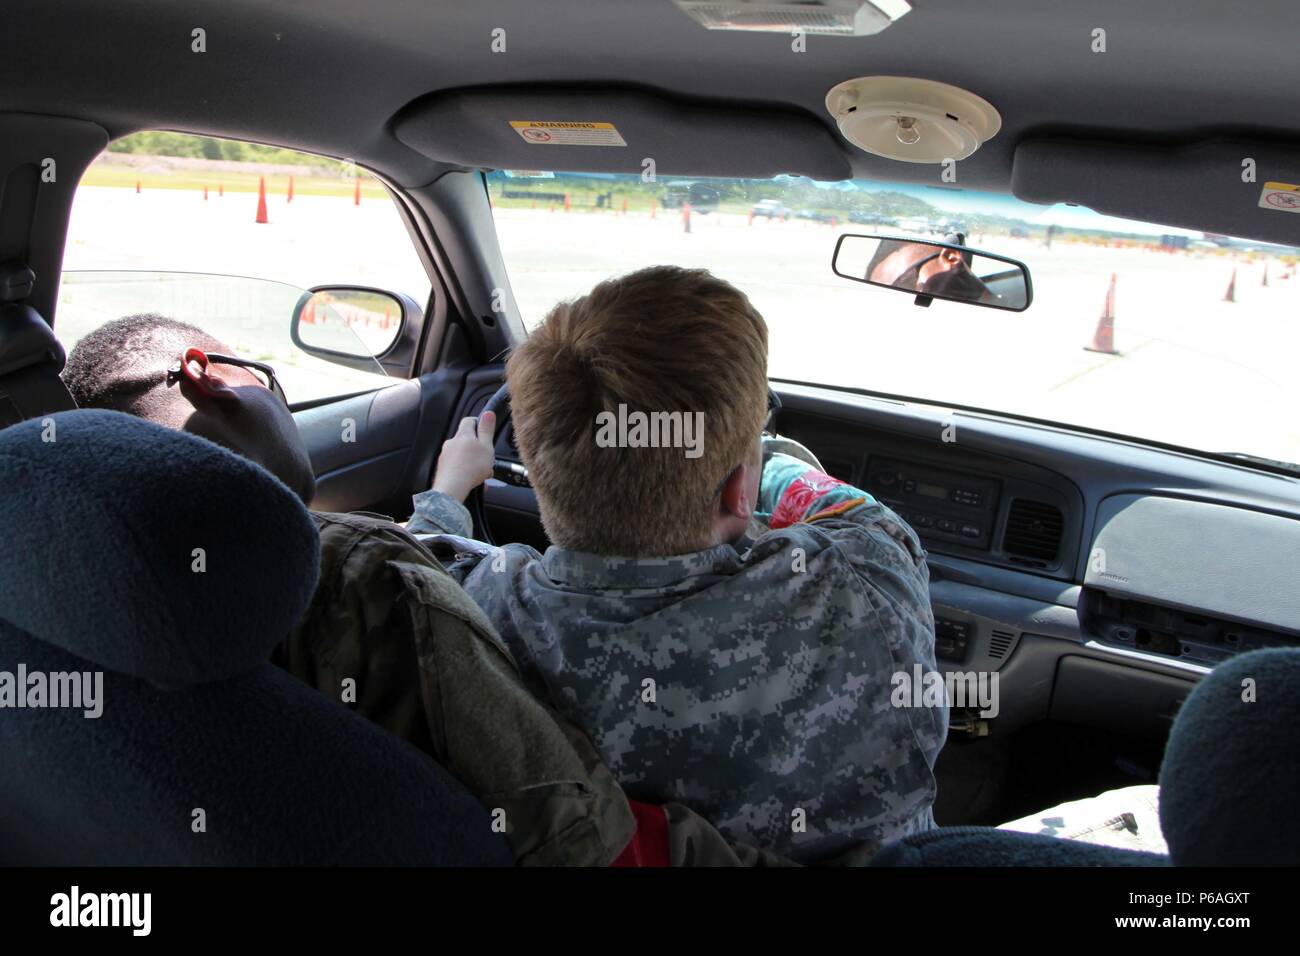 A U.S. Soldier assigned to 4th Military Information Support Group practices taking over the steering wheel from an “incapacitated” driver on Gryphon Group Security Solutions’ evasive driving course, May 4, 2016. Soldiers practiced driving a vehicle from the passenger seat in the event that the driver was injured. They also learned to maneuver through tight environments at high speeds, as well as first aid techniques and advanced pistol marksmanship during the week-long course at the Fort Bragg Combat Training Center in Maxton, North Carolina. Stock Photo